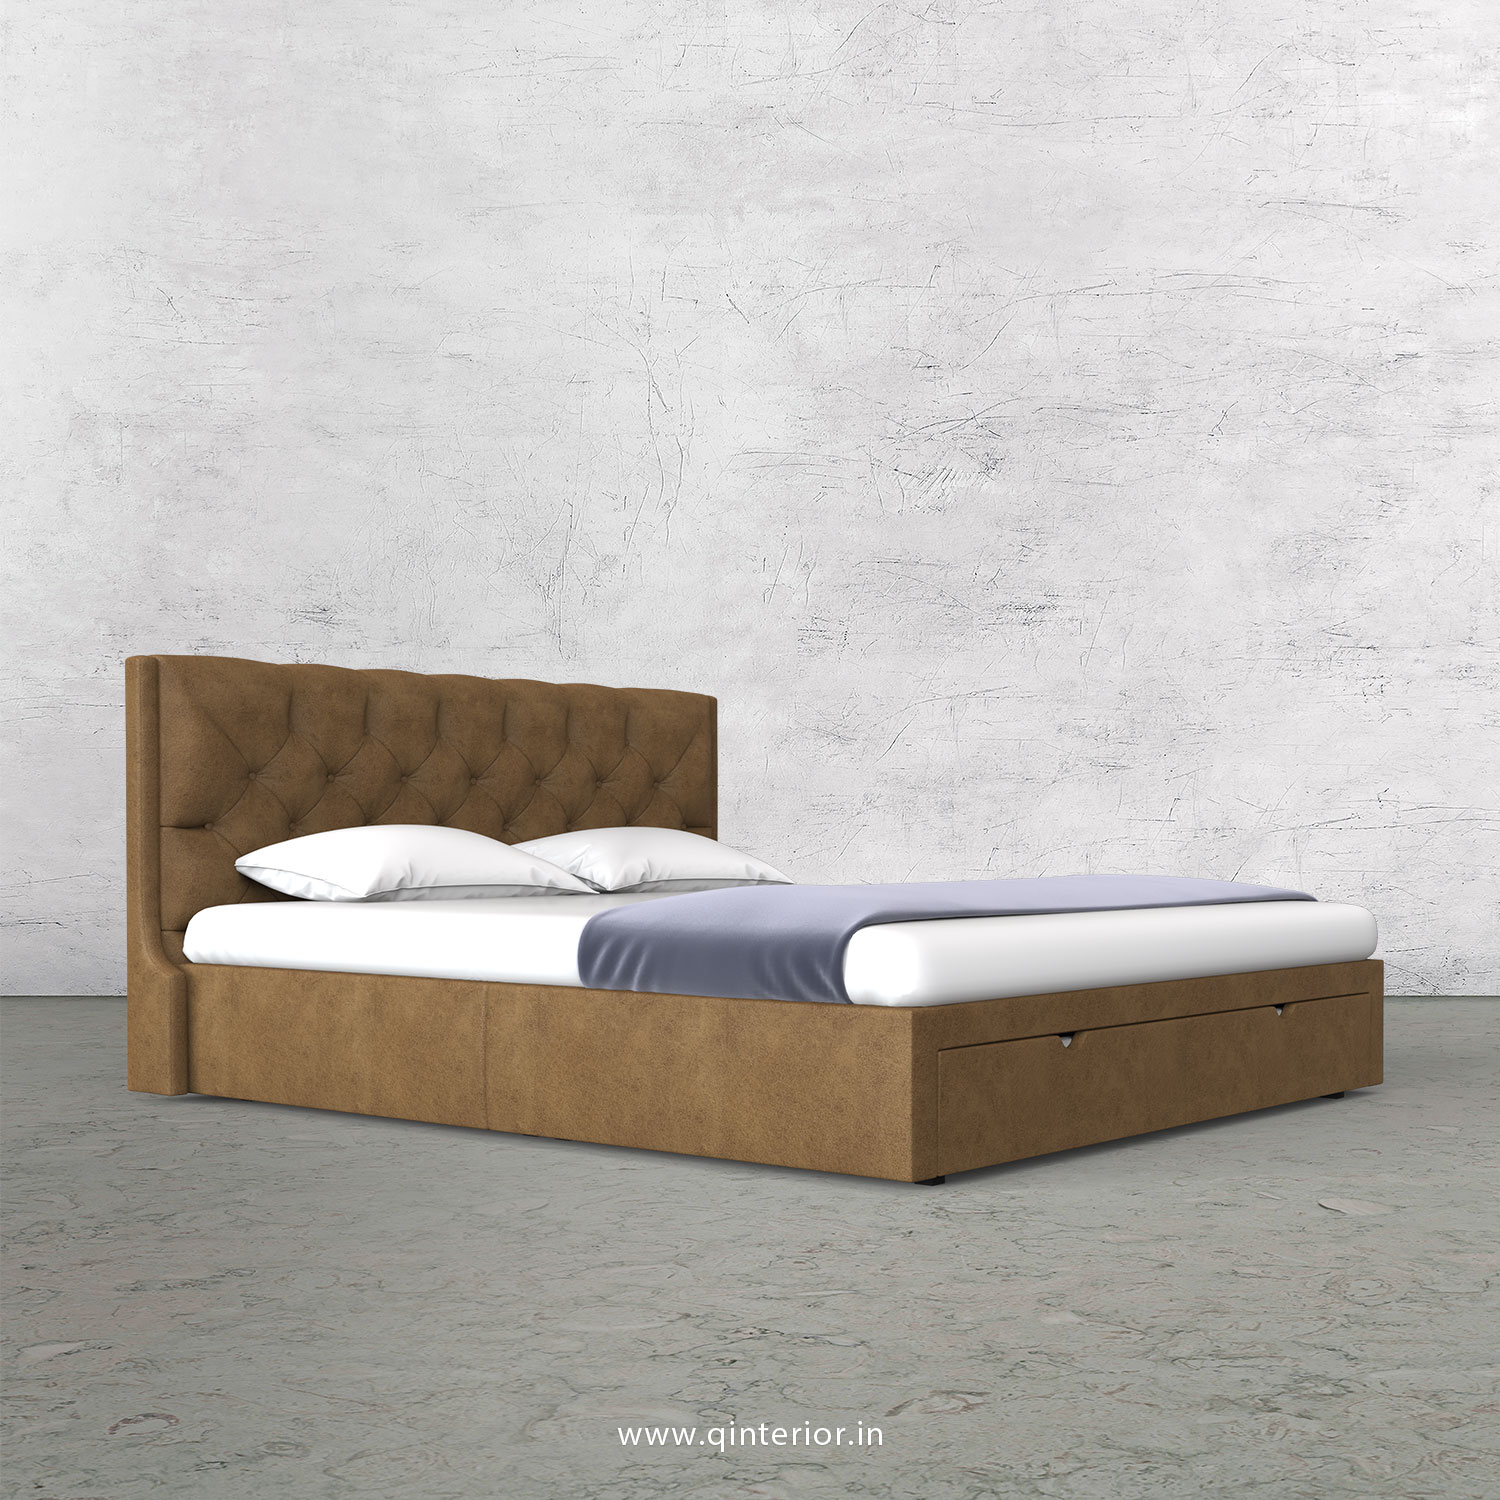 Scorpius Queen Storage Bed in Fab Leather Fabric - QBD001 FL02